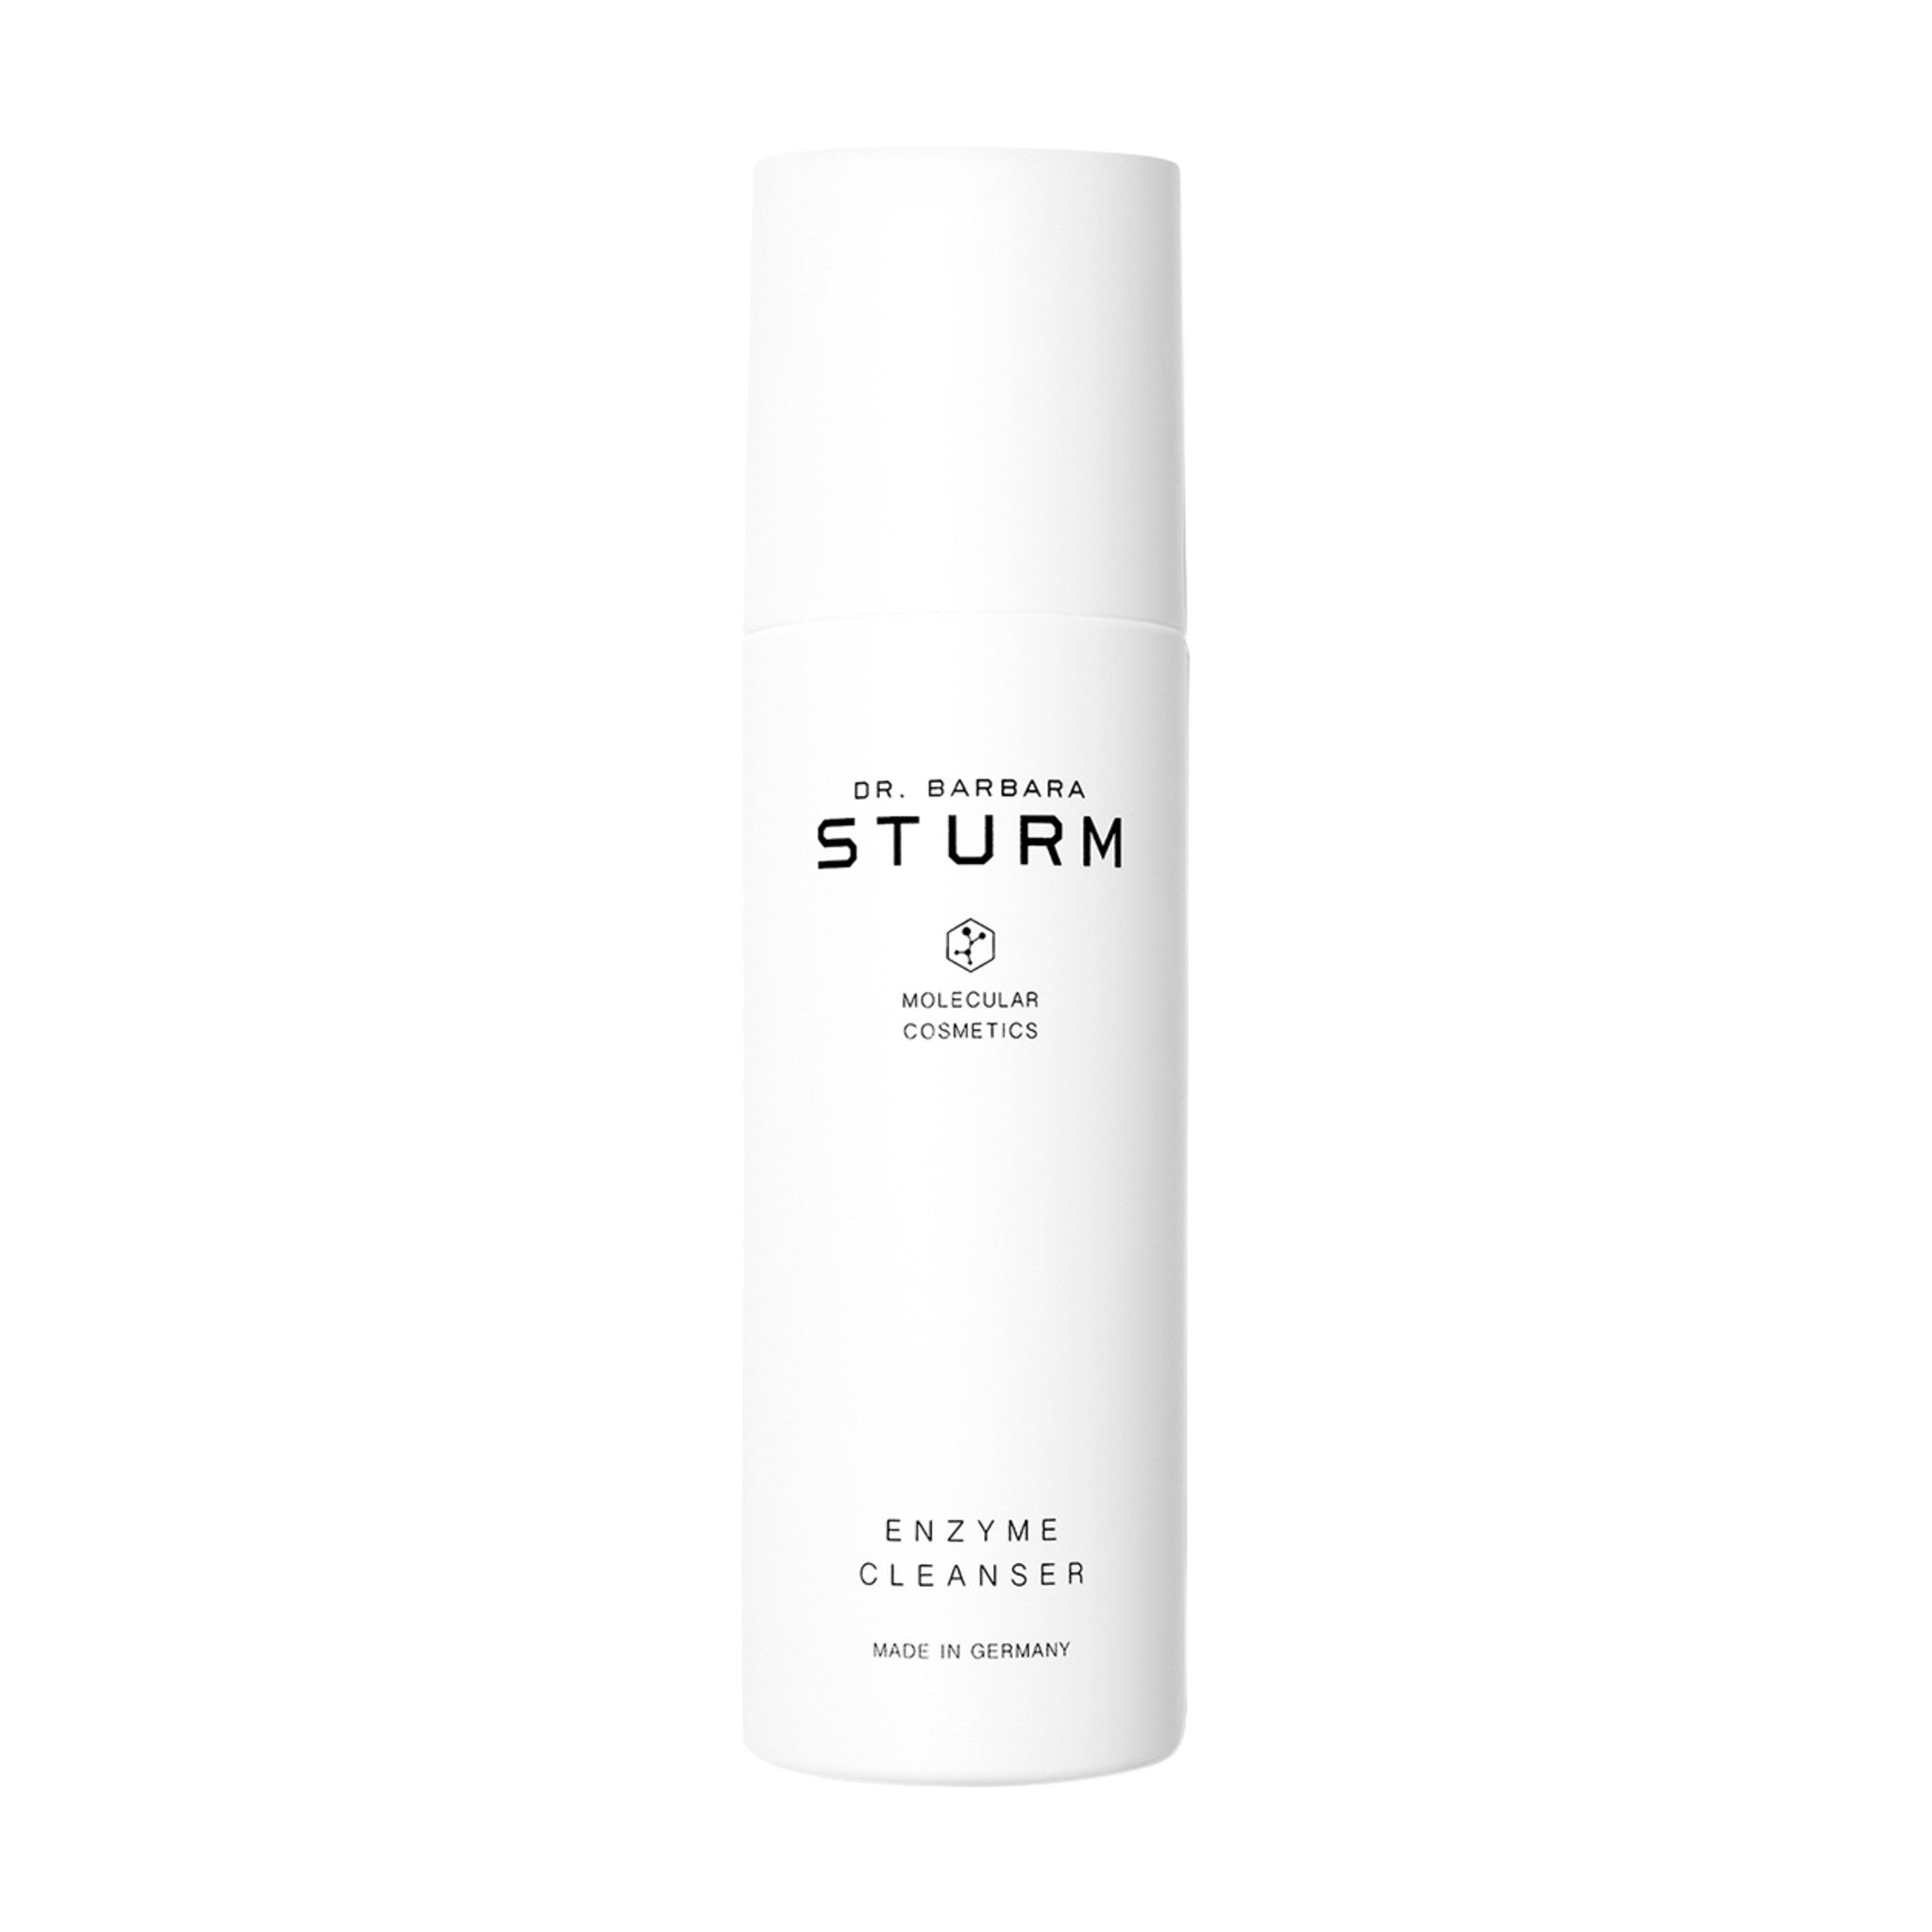 Dr. Barbara Sturm Enzyme Cleanser main image.